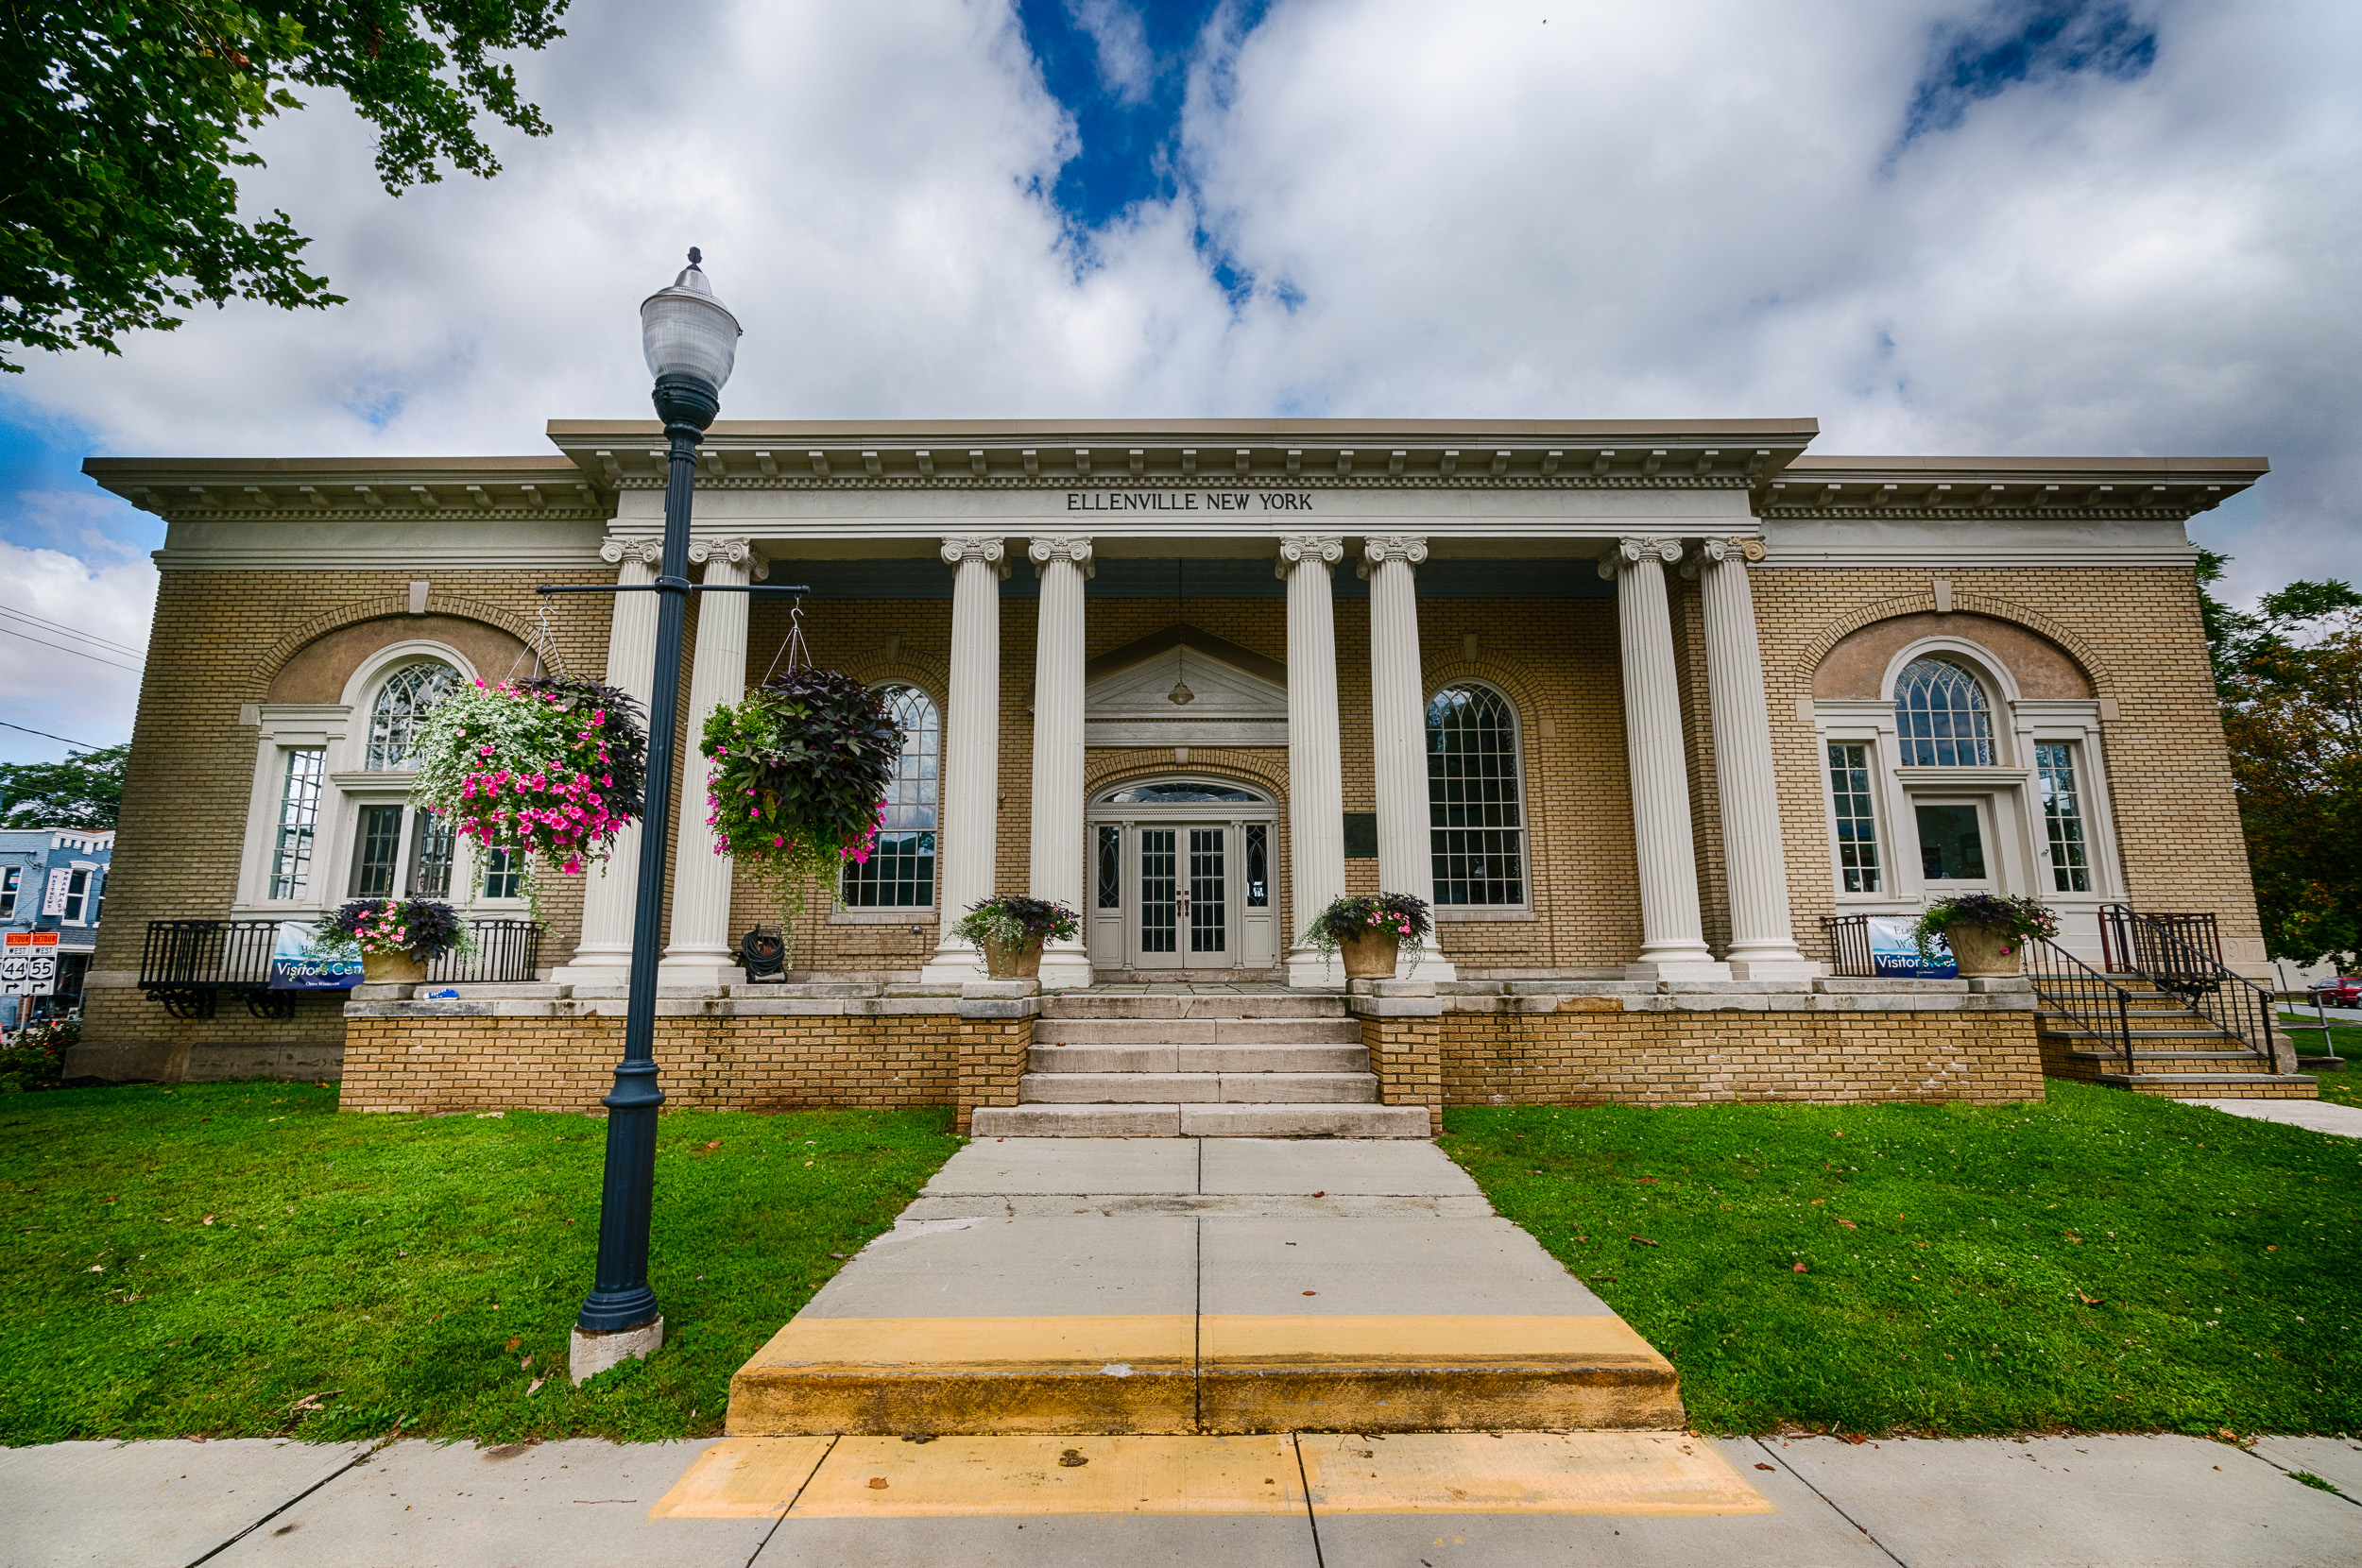 Ellenville - HDR Photo w/ Sony A99 II and 16-35mm f/2.8 ZA Lens